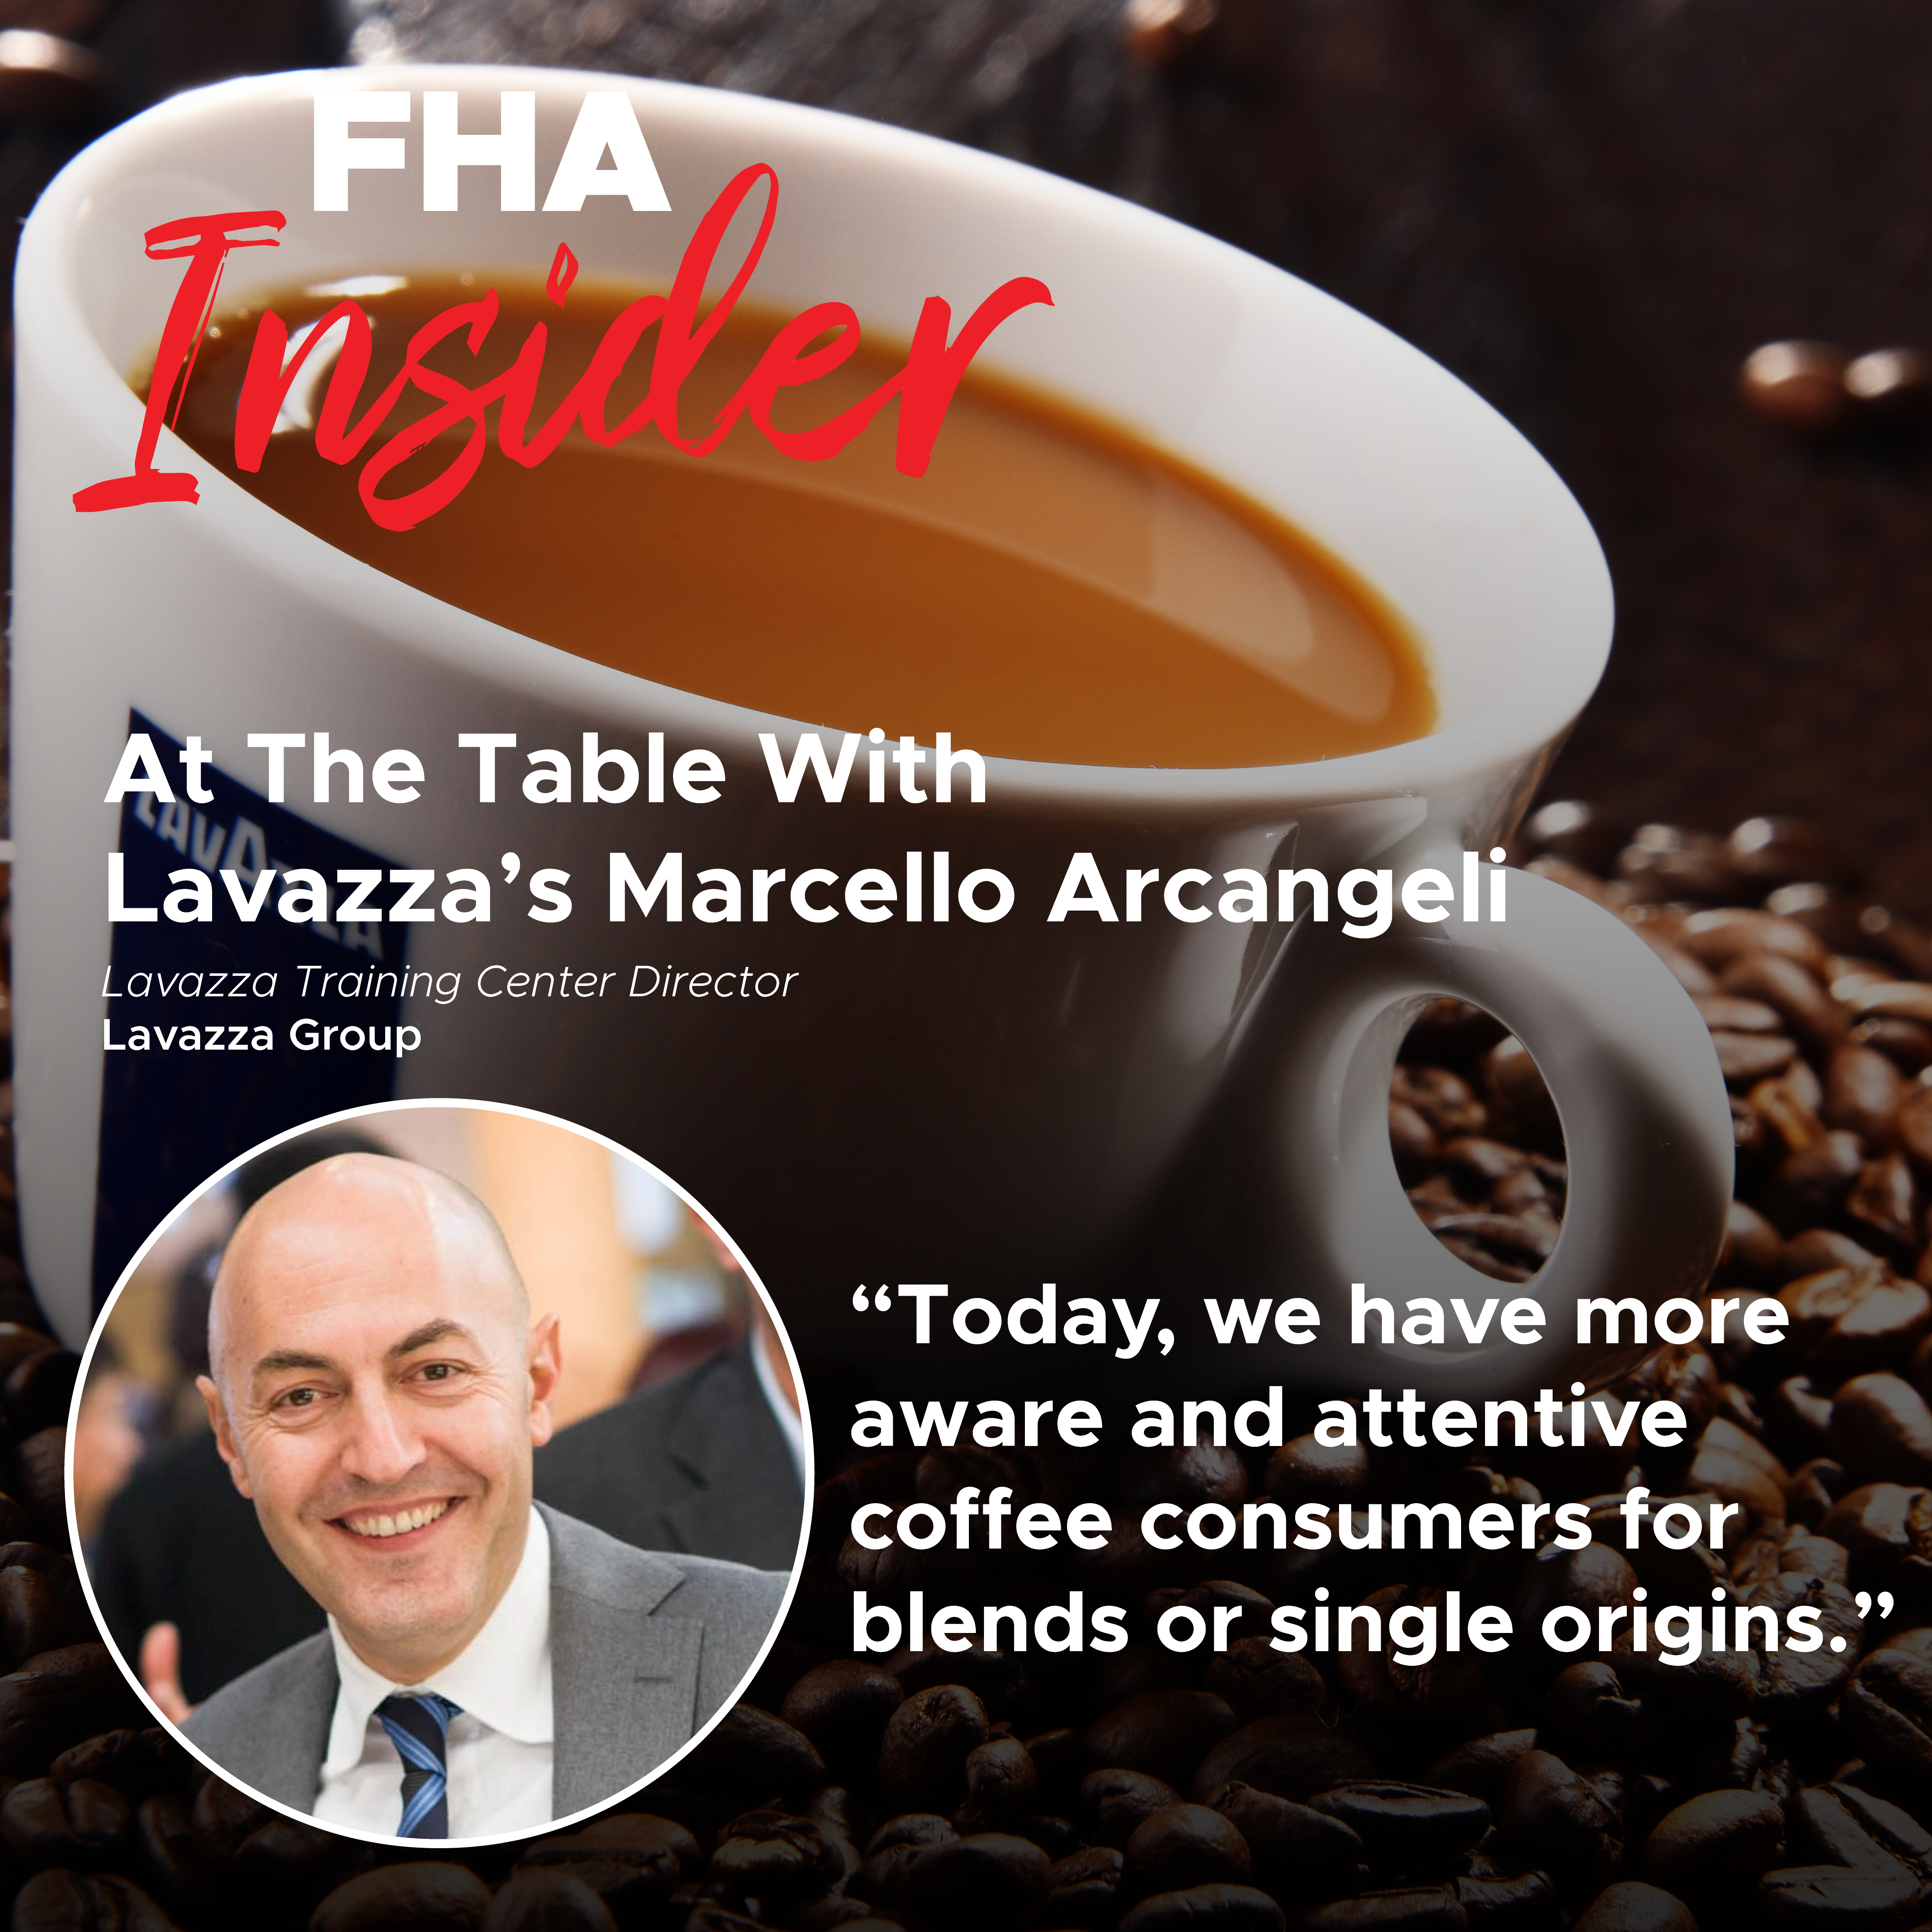 At The Table With Lavazza Training Center Director, Marcello Arcangeli